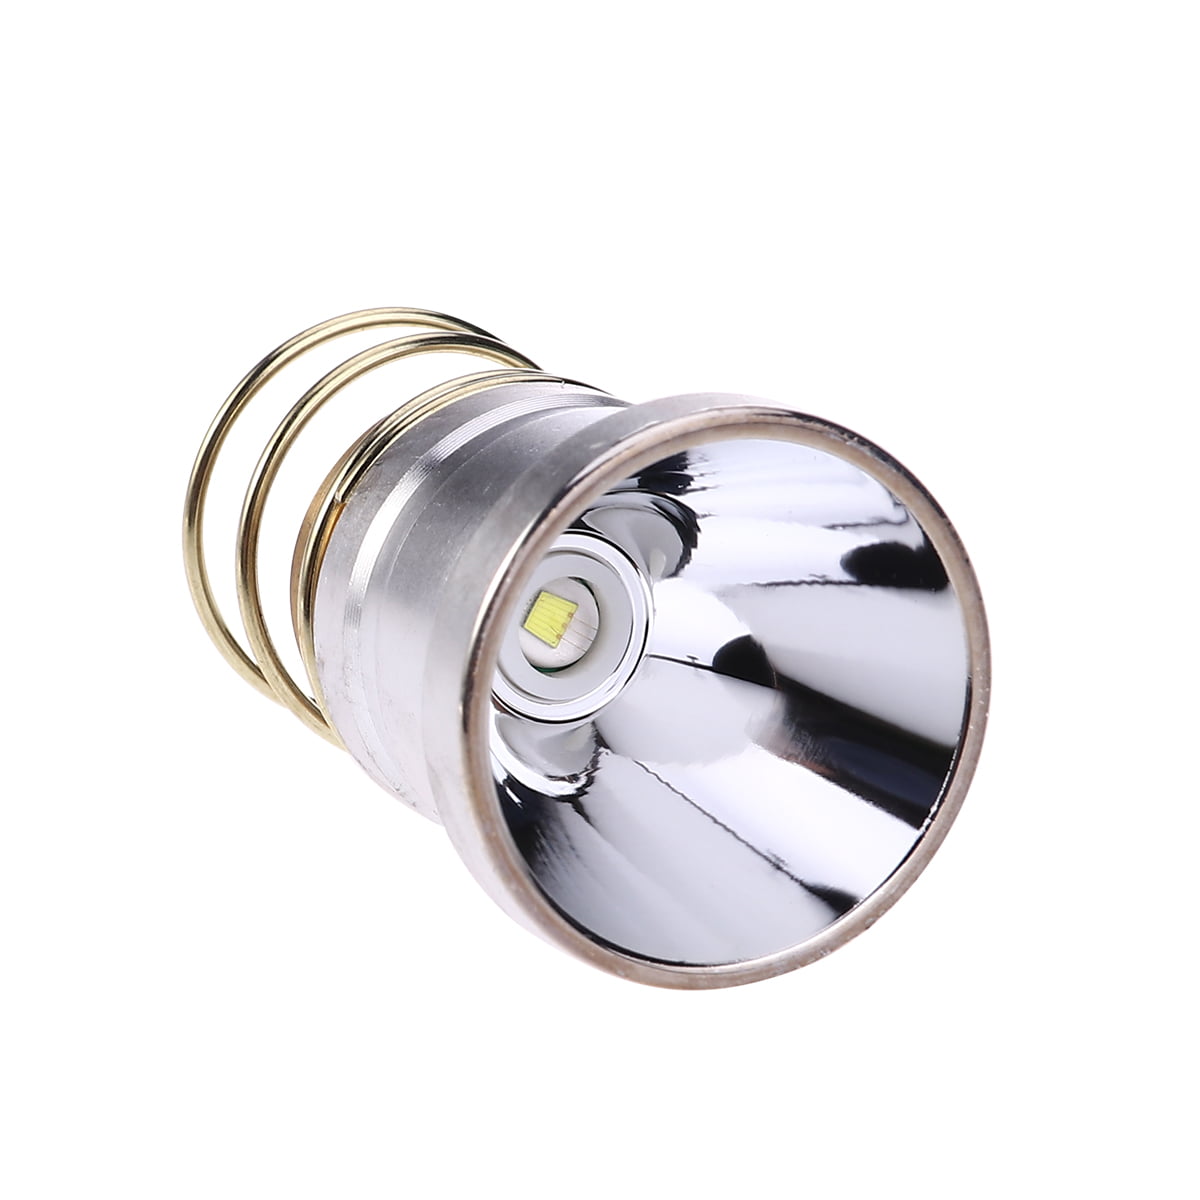 New For Surefire 6P G2 9P Flashlight Bulb-LED 1000lm 3.7 V Drop-in Portable Part 